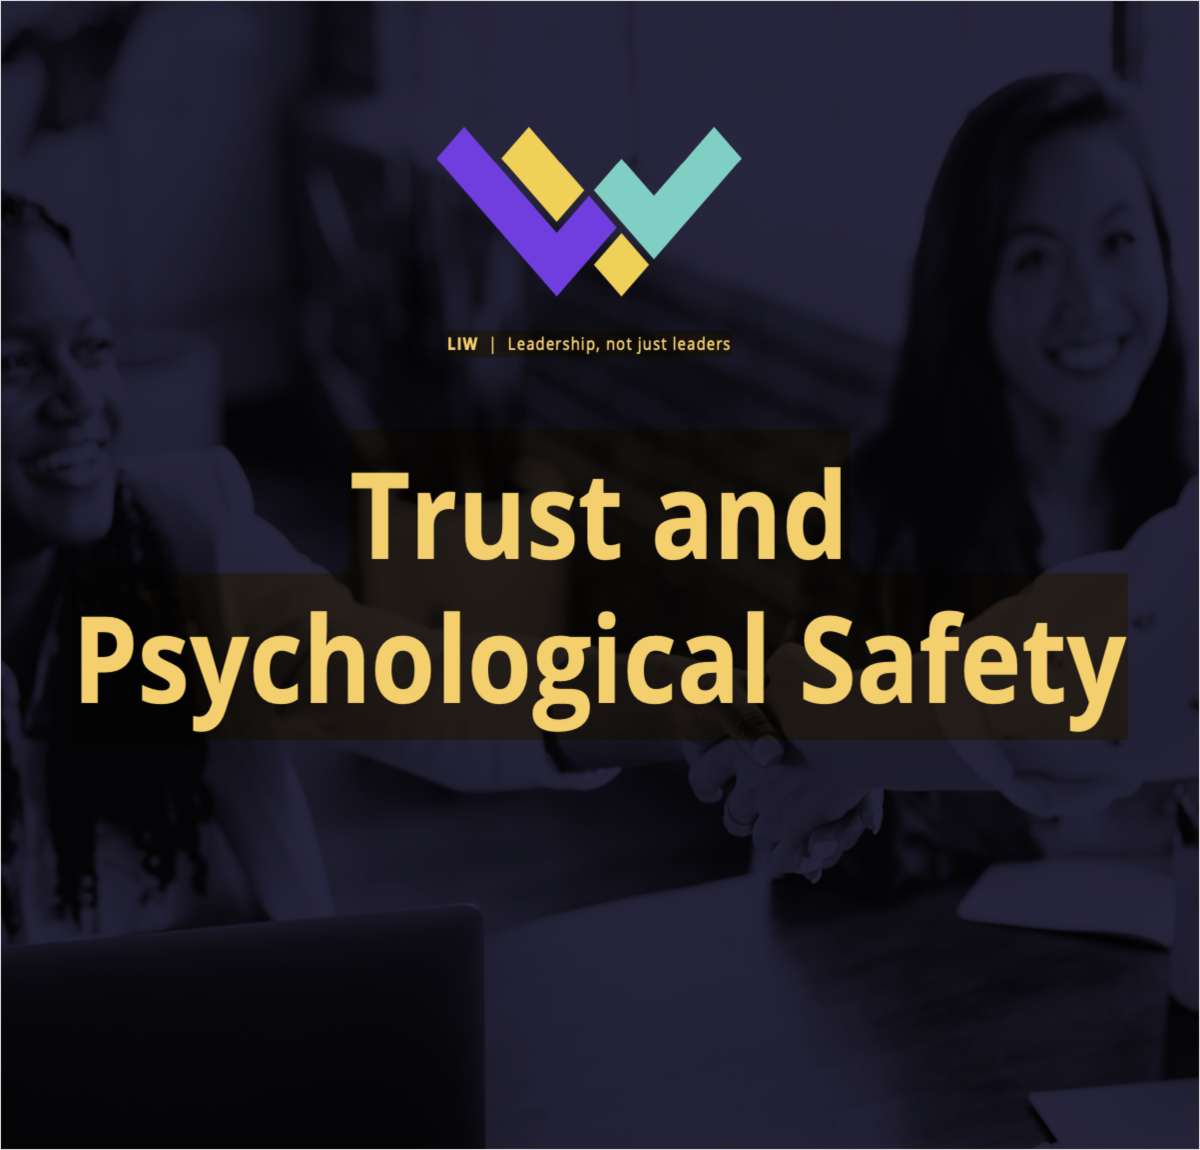 A guide to Trust & Psychology Safety - Why building a culture of trust is critical for successful leadership